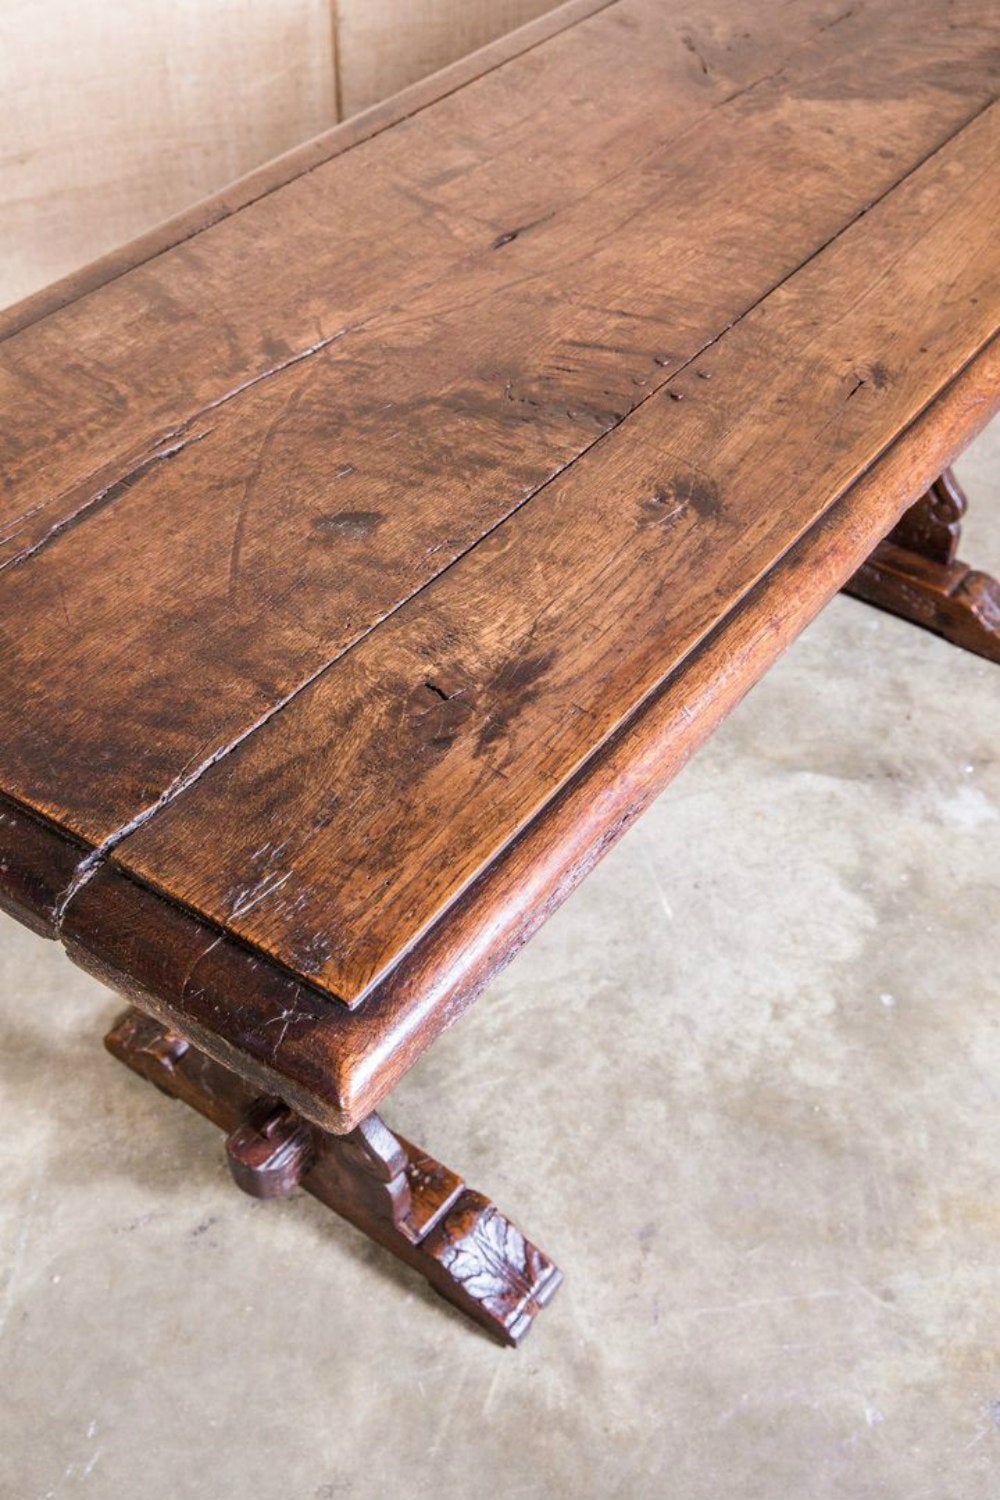 Charming 18th century country French trestle base console or center table. Handcrafted of solid walnut with a beveled plank top raised by carved shaped supports with motifs typical of artisans from the Auvergne region. Joined by a straight stretcher